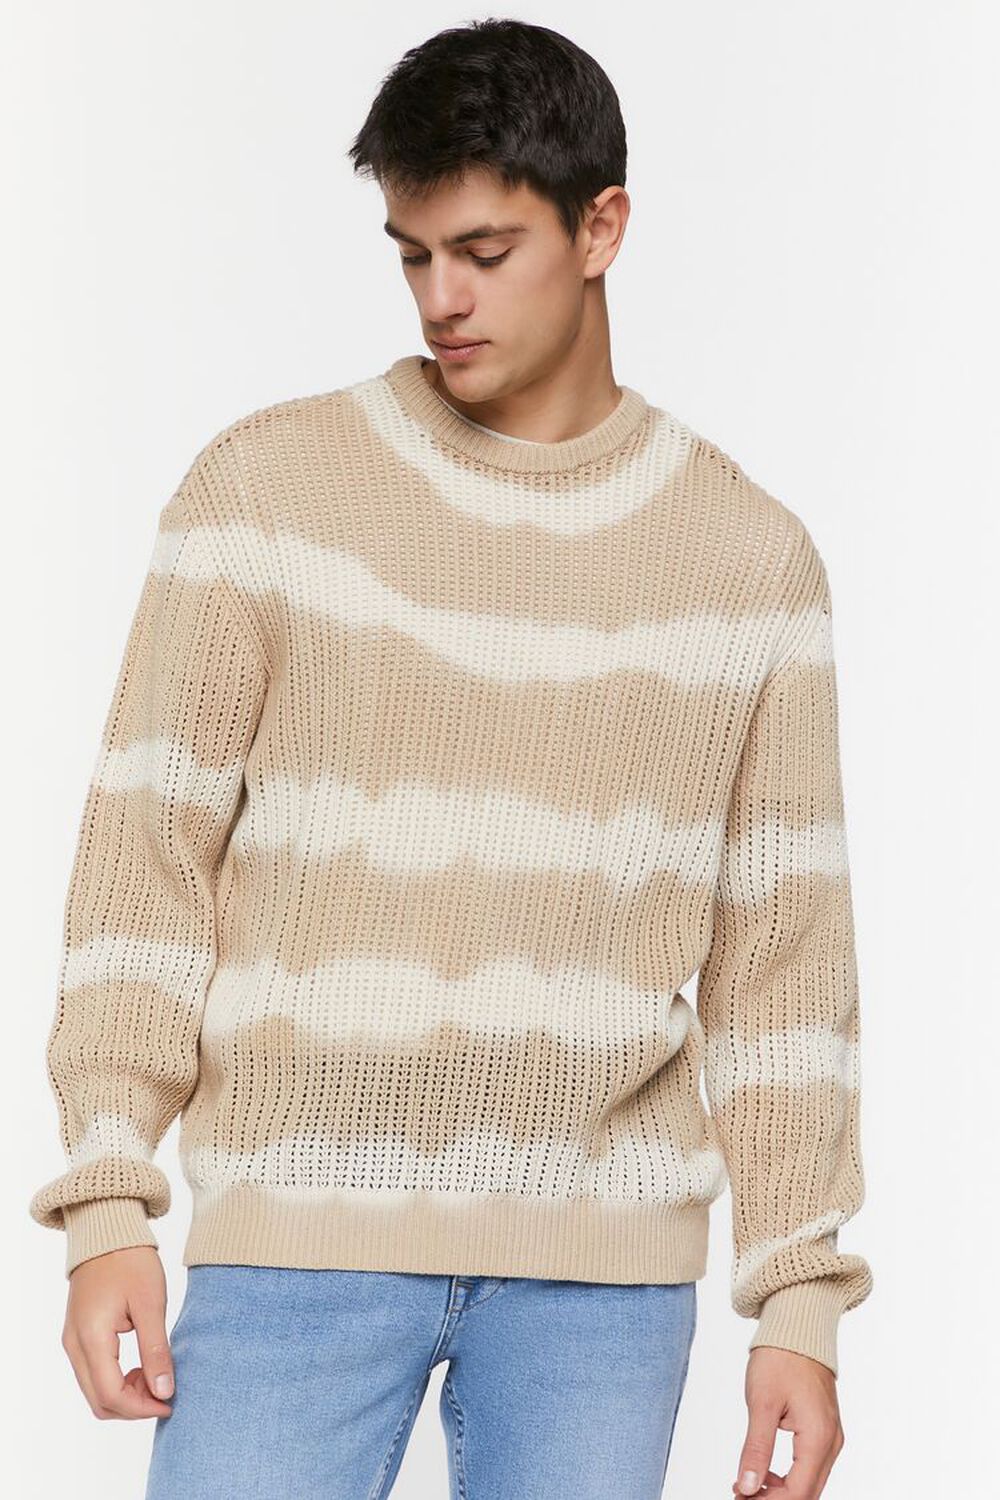 TAUPE/CREAM Tie-Dye Striped Sweater, image 1